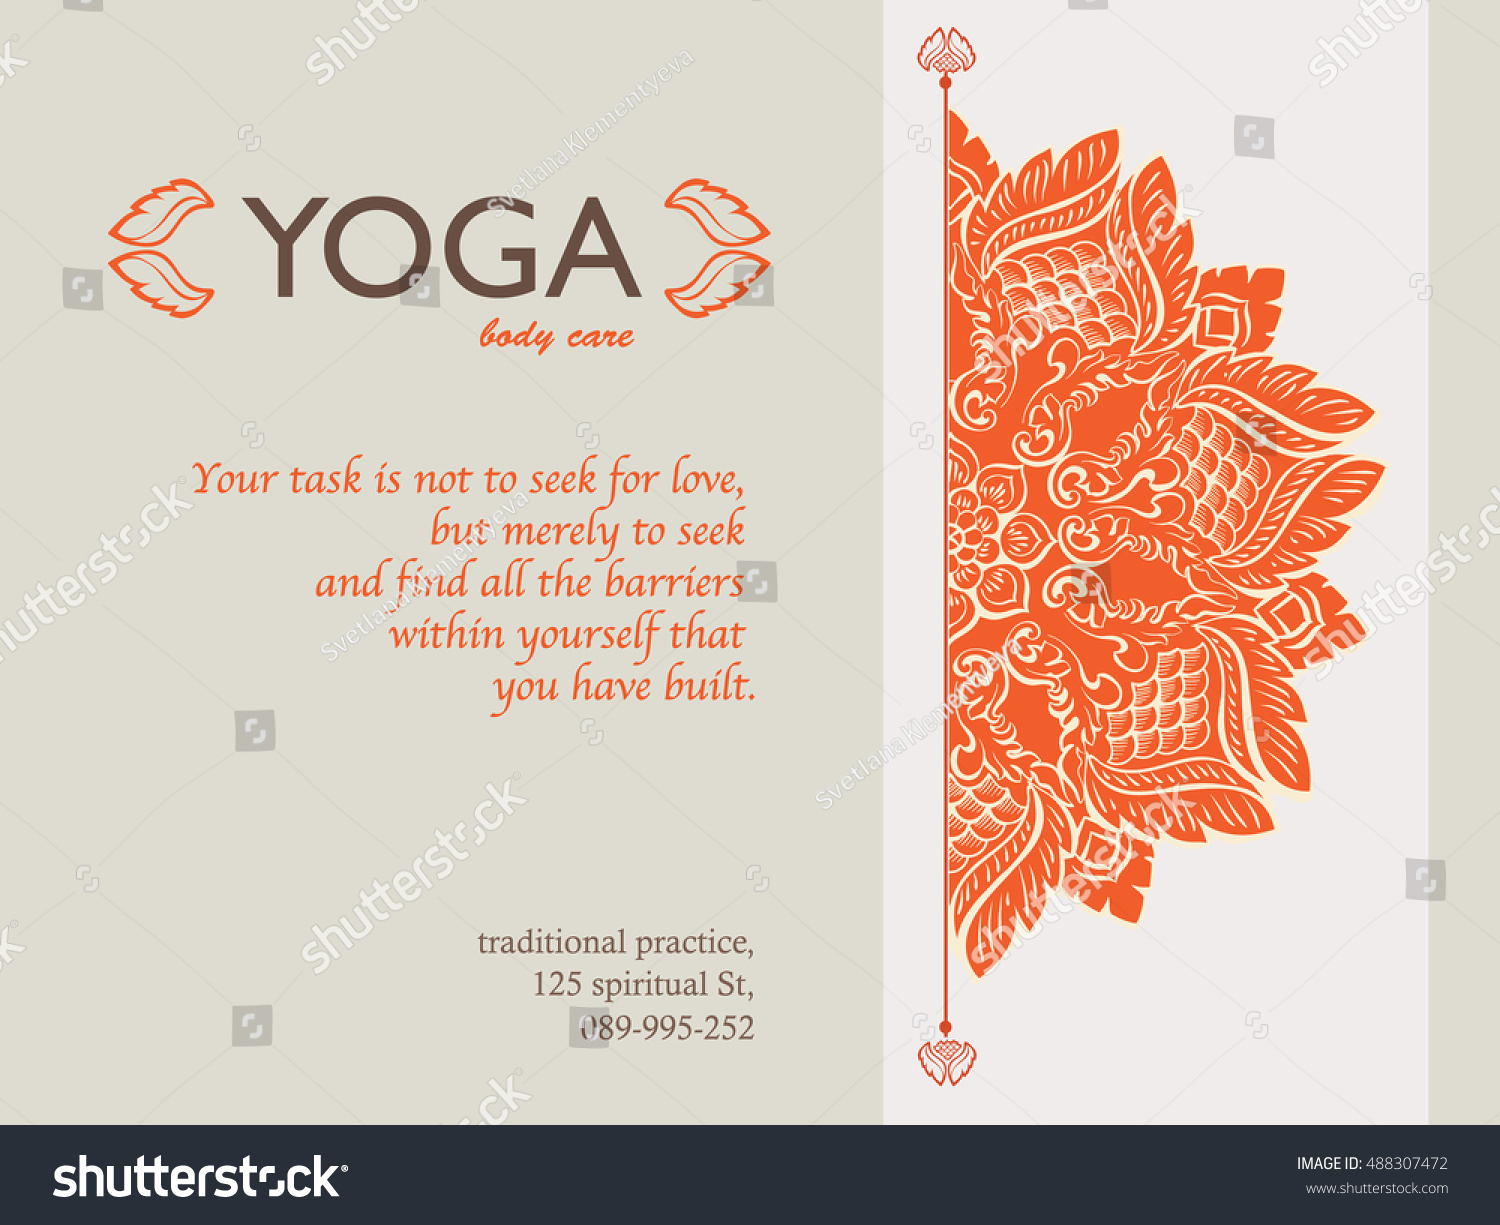 Yoga Gift Certificate Templates | Gift Certificate Templates Inside Yoga Gift Certificate Template Free